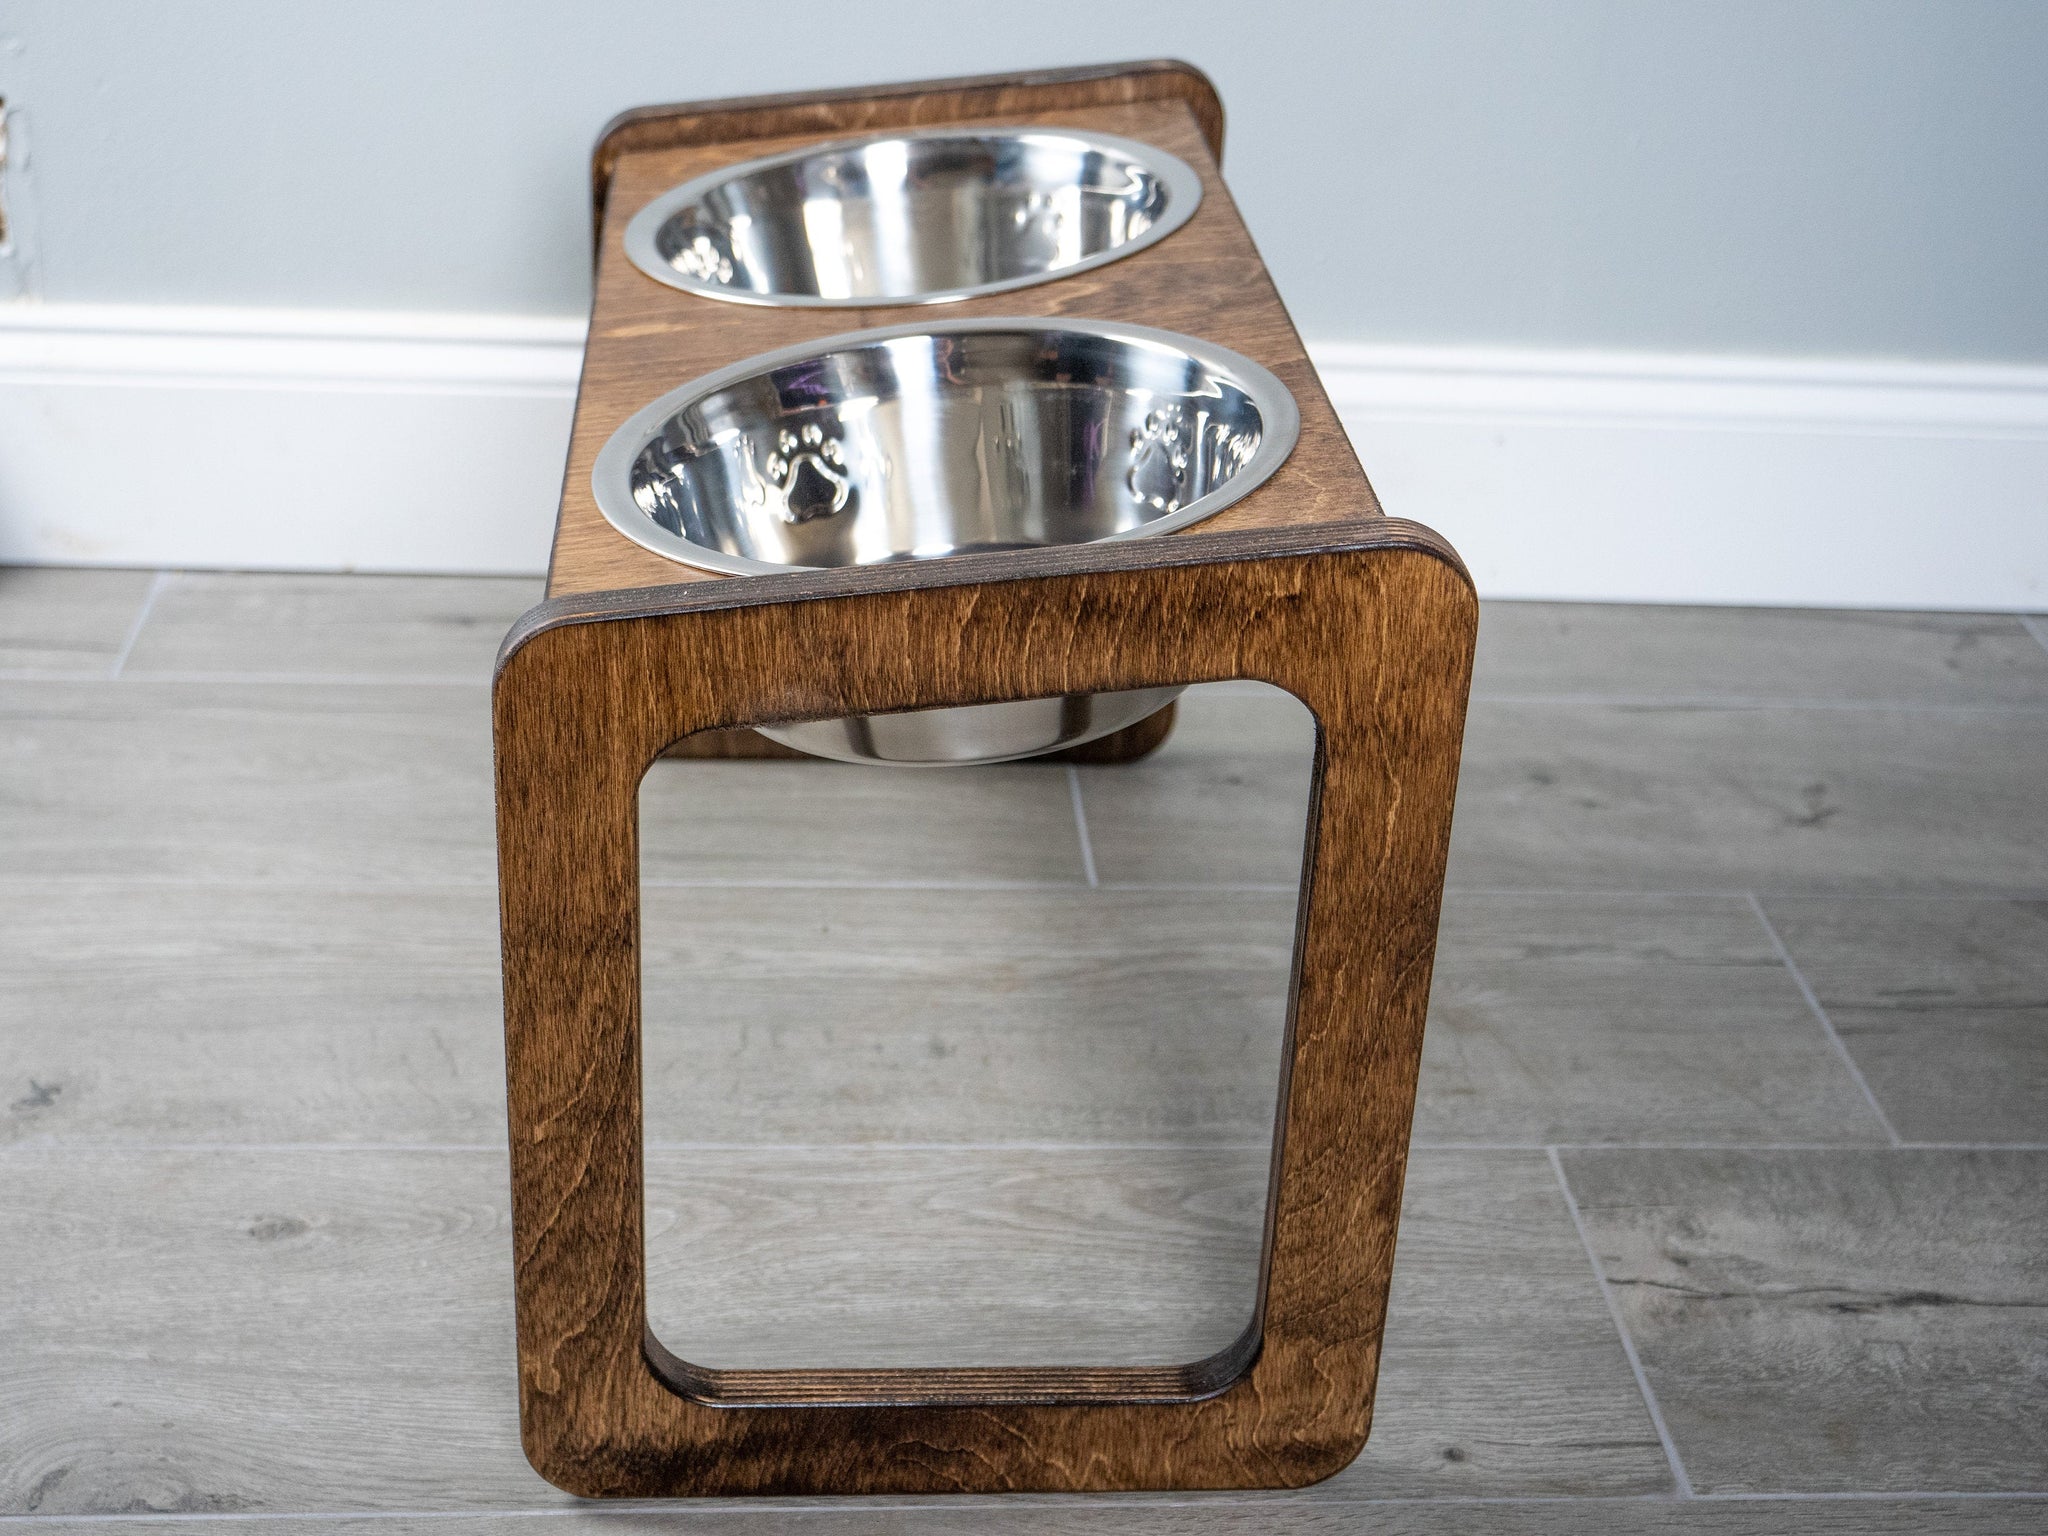 Yeti Raised Dog Bowl Stand - Bowl not included – Woodland Steelworks